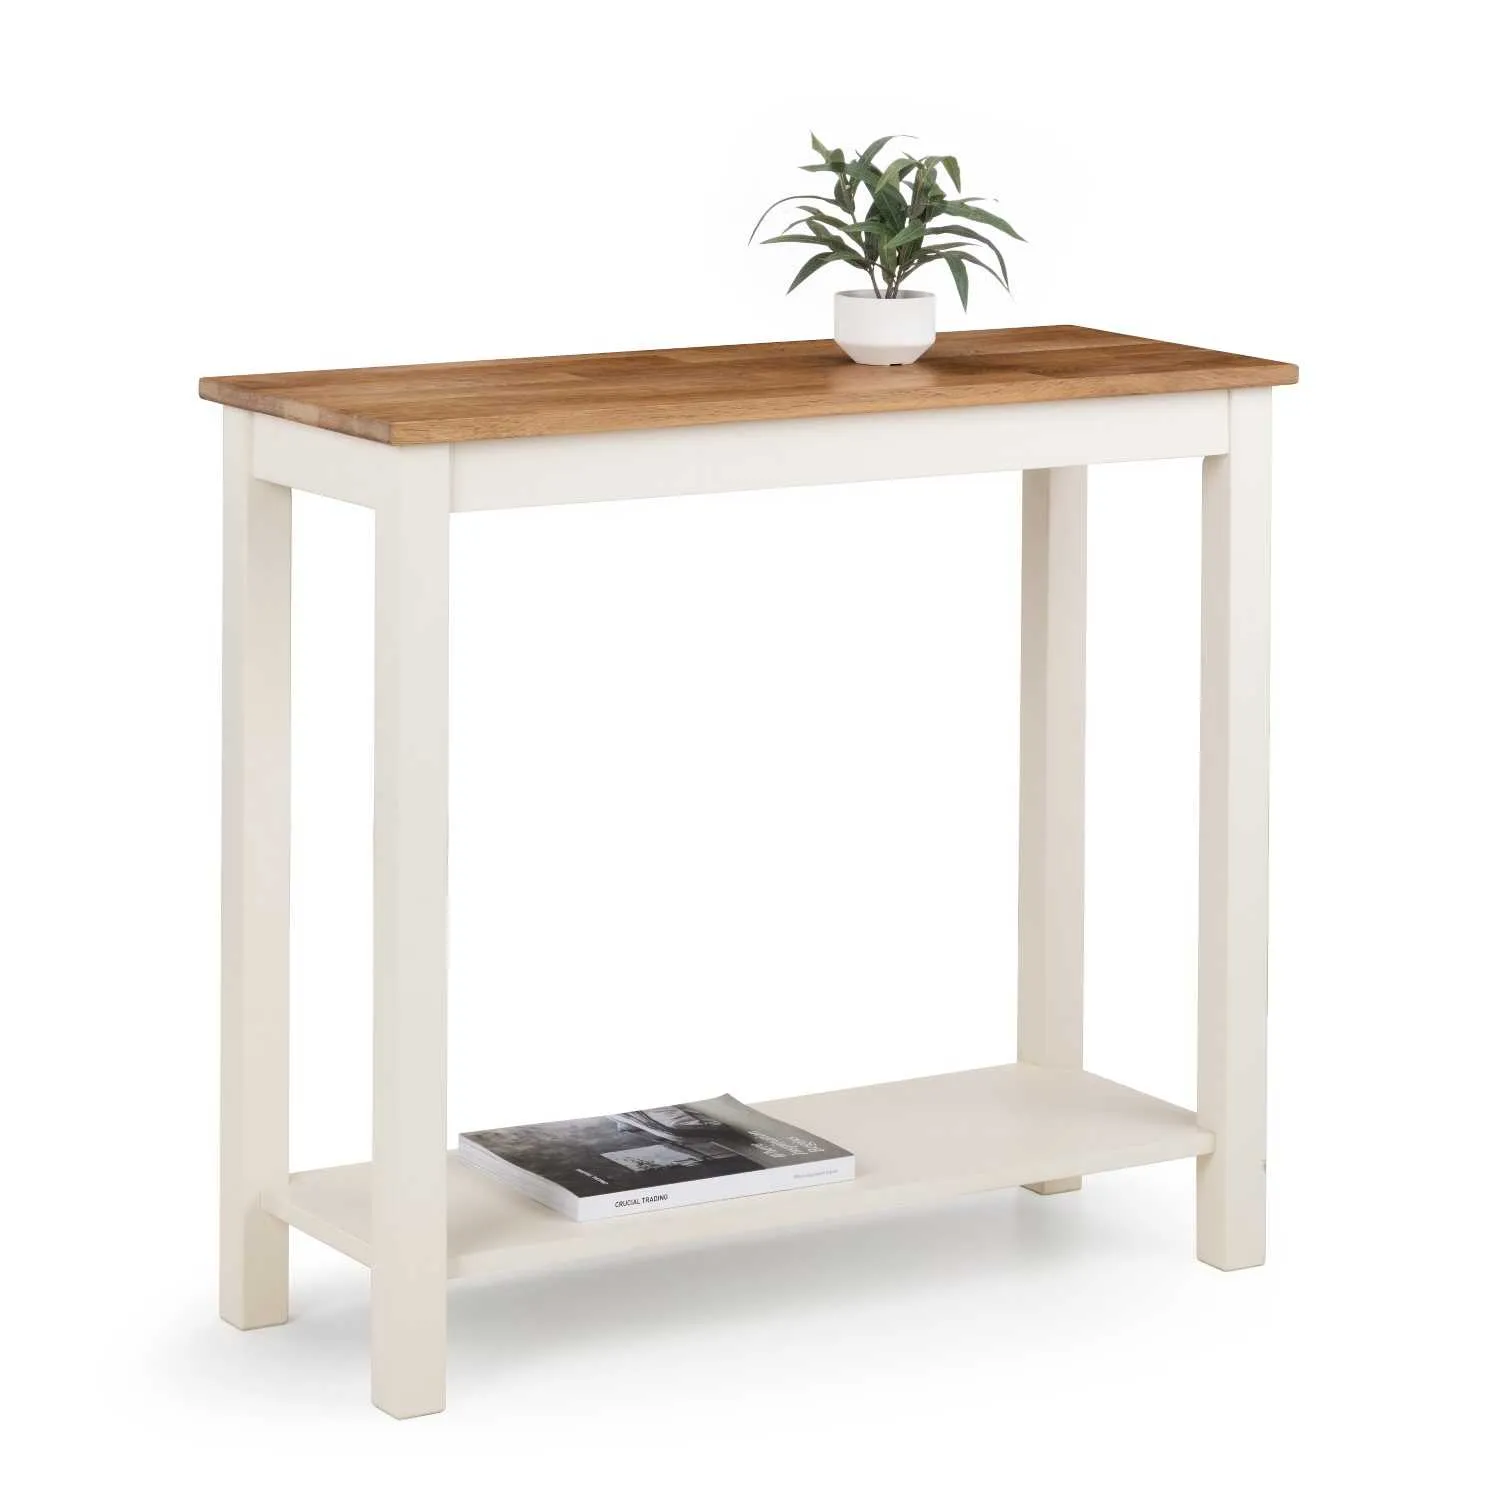 COXMOOR CONSOLE TABLE 90CM IVORY AND OAK